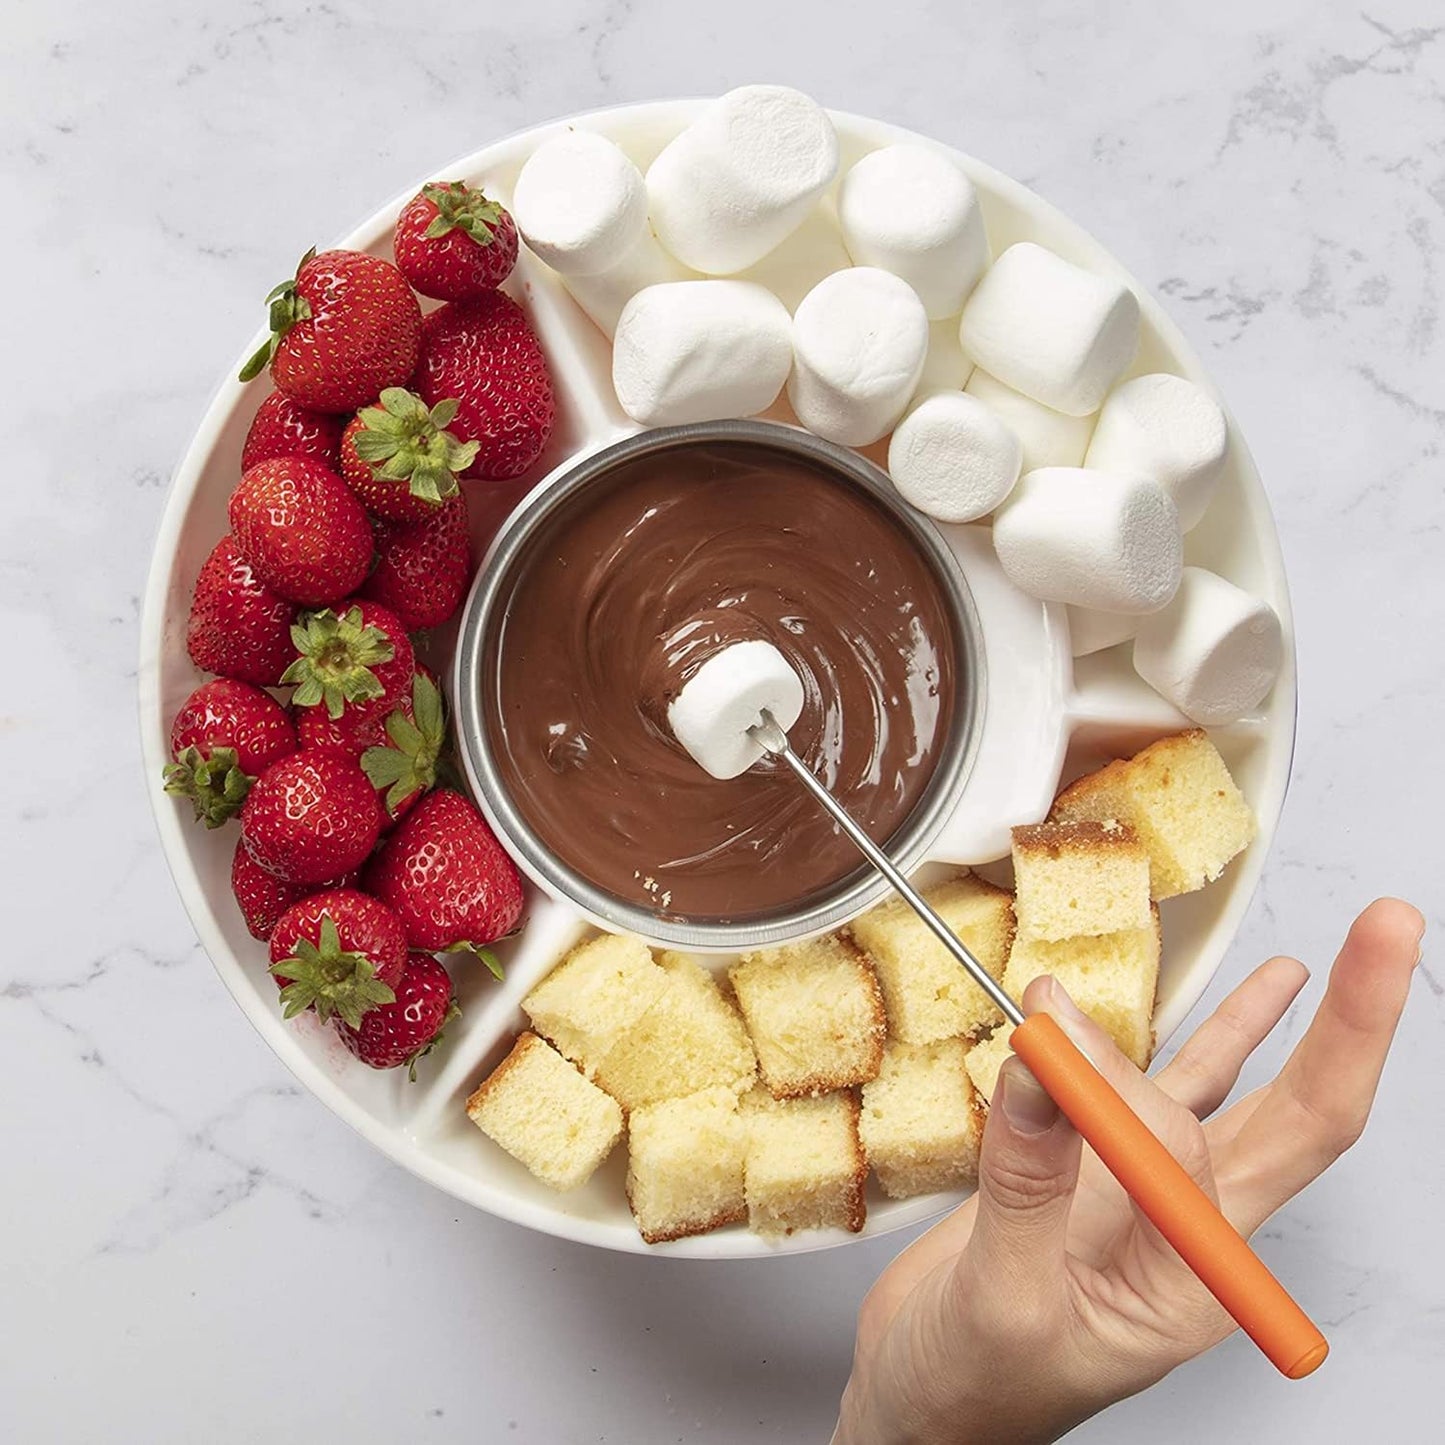 Electric Fondue Pot Set for Chocolate and Cheese Chocolate Fondue Kit with Dipping Forks, Temperature Control, 9-ounce Detachable Bowl, for Chocolate Melts Cheese Melts (White)